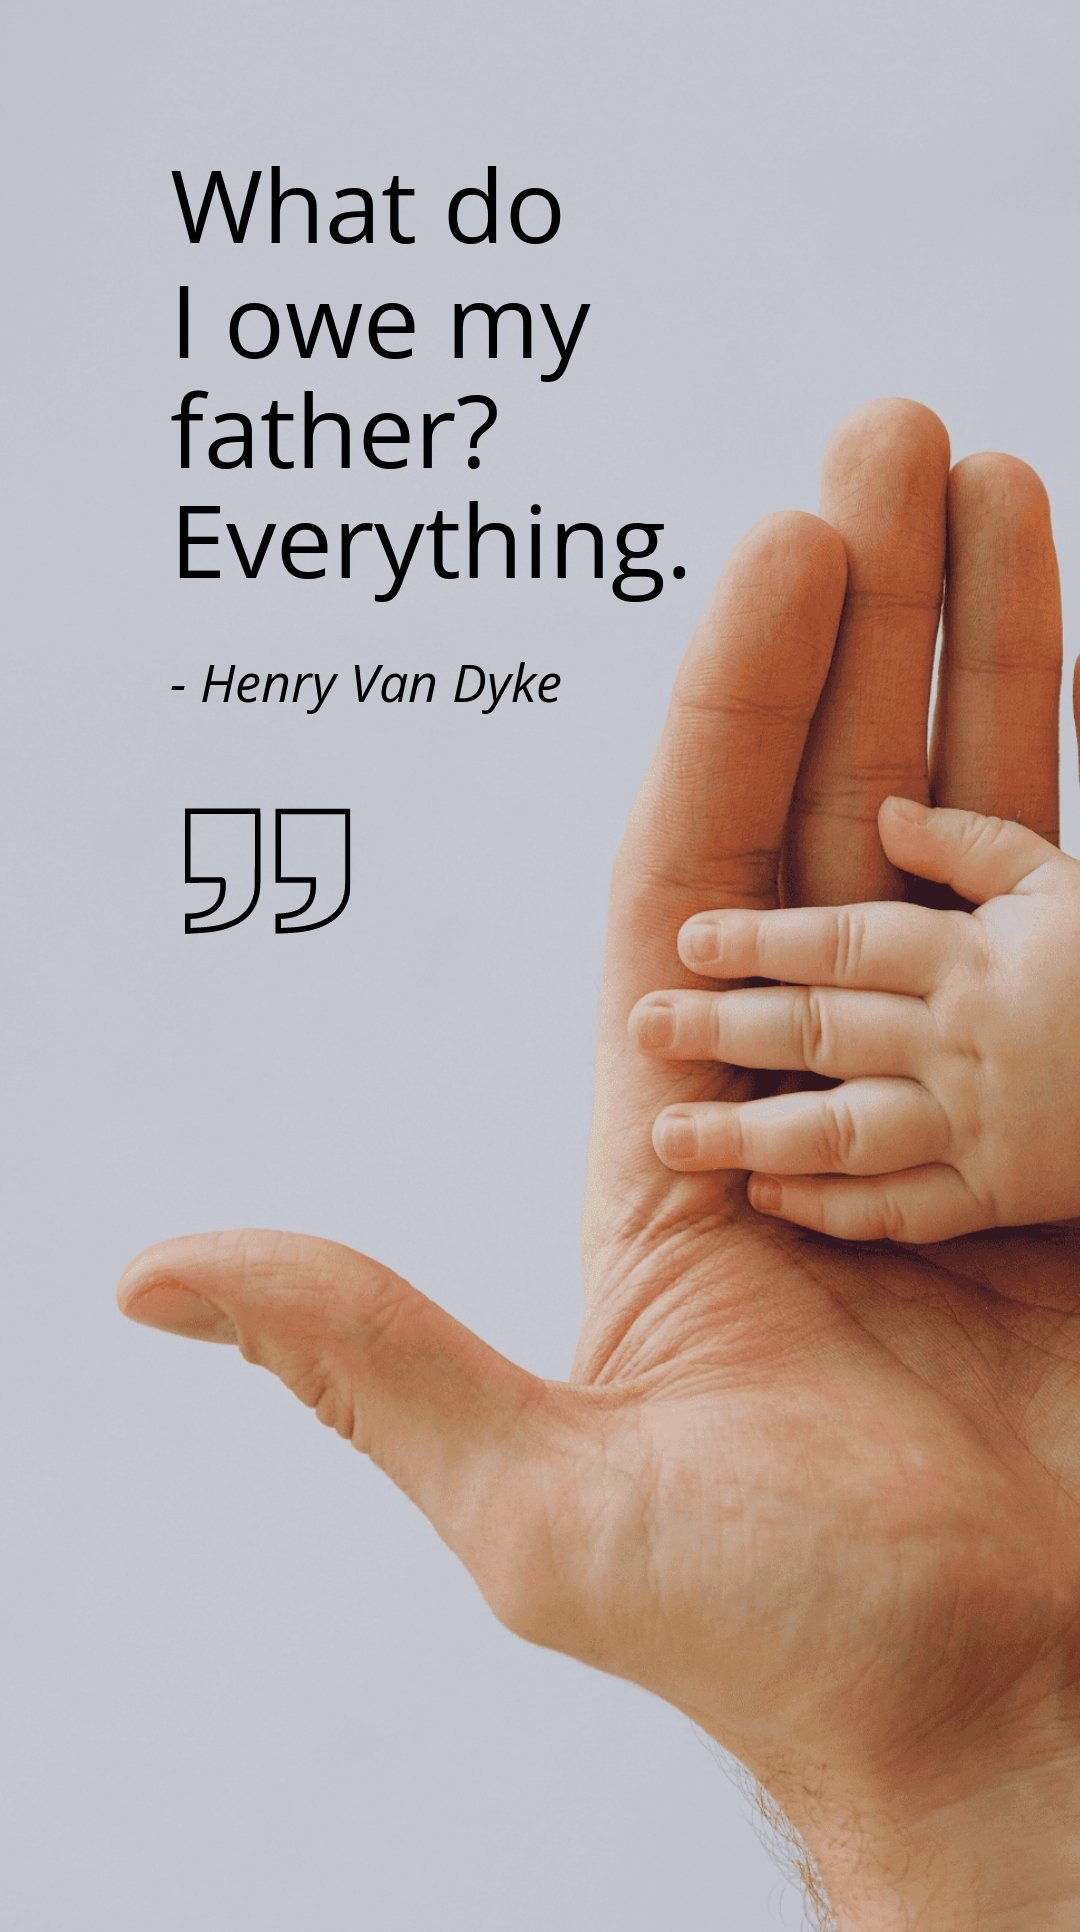 Free Henry Van Dyke - What do I owe my father? Everything.